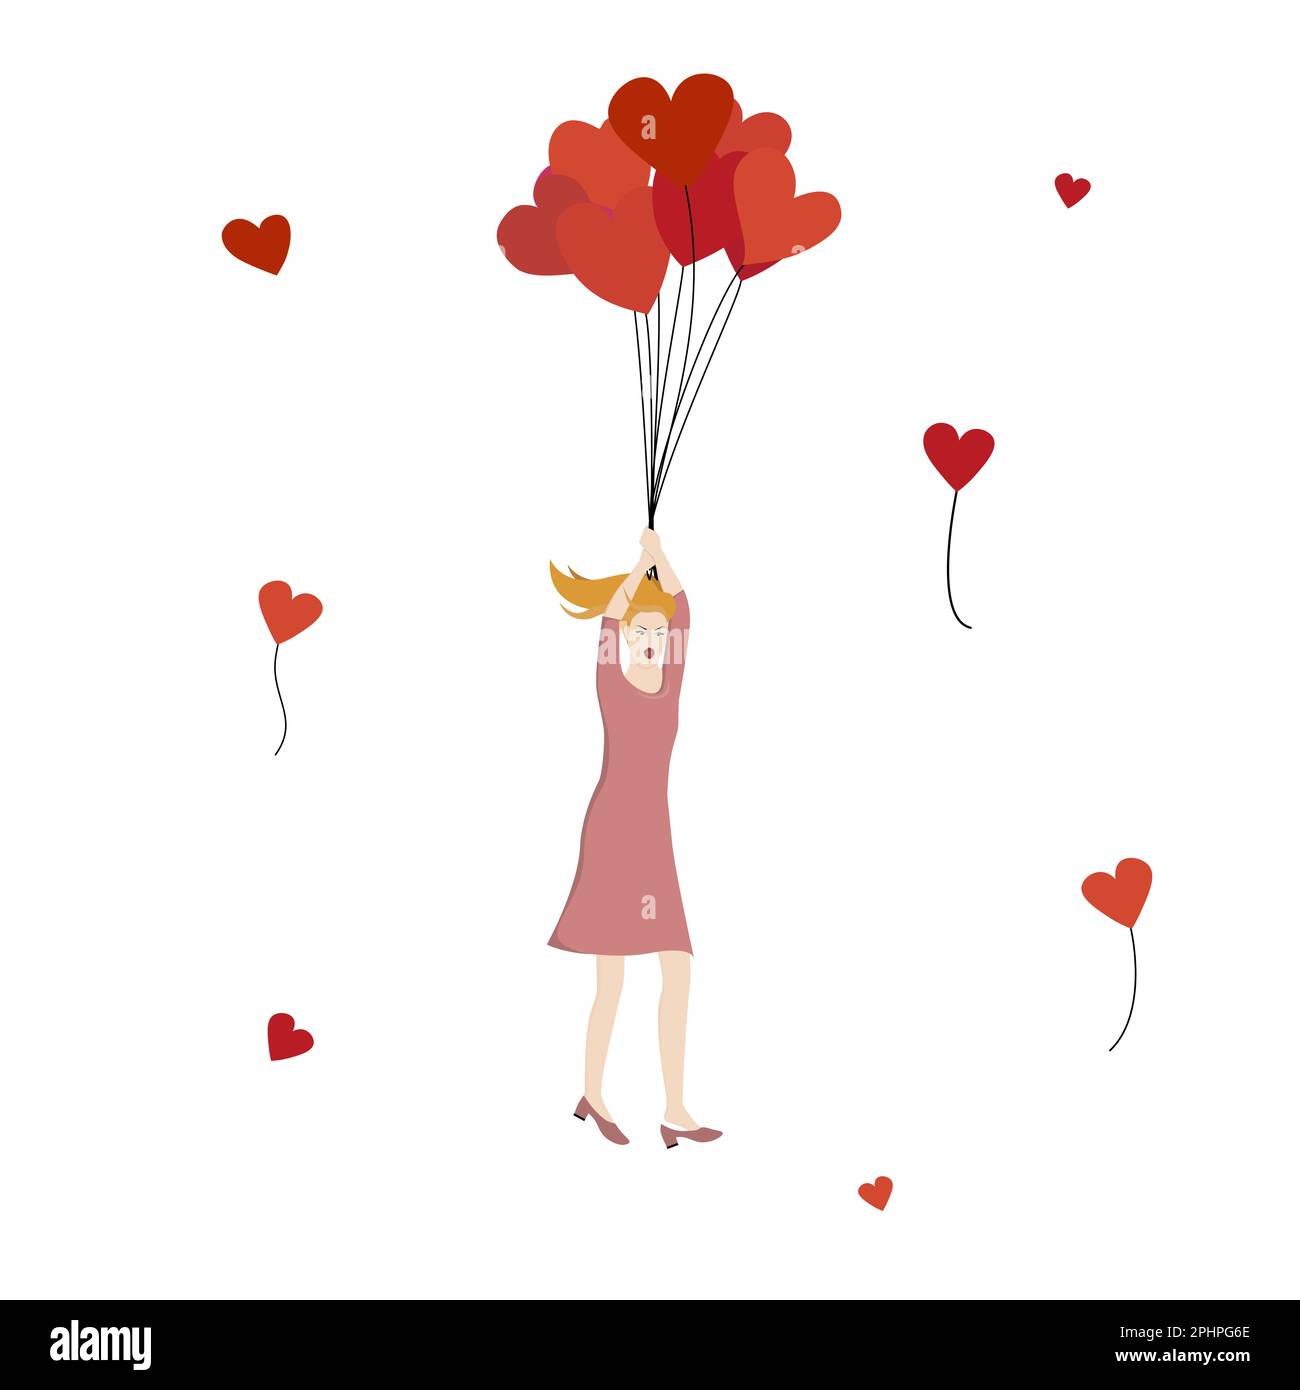 Girl holding the string of bunch of flying red heart balloons. Scared woman flying high with baloons. Stock Vector